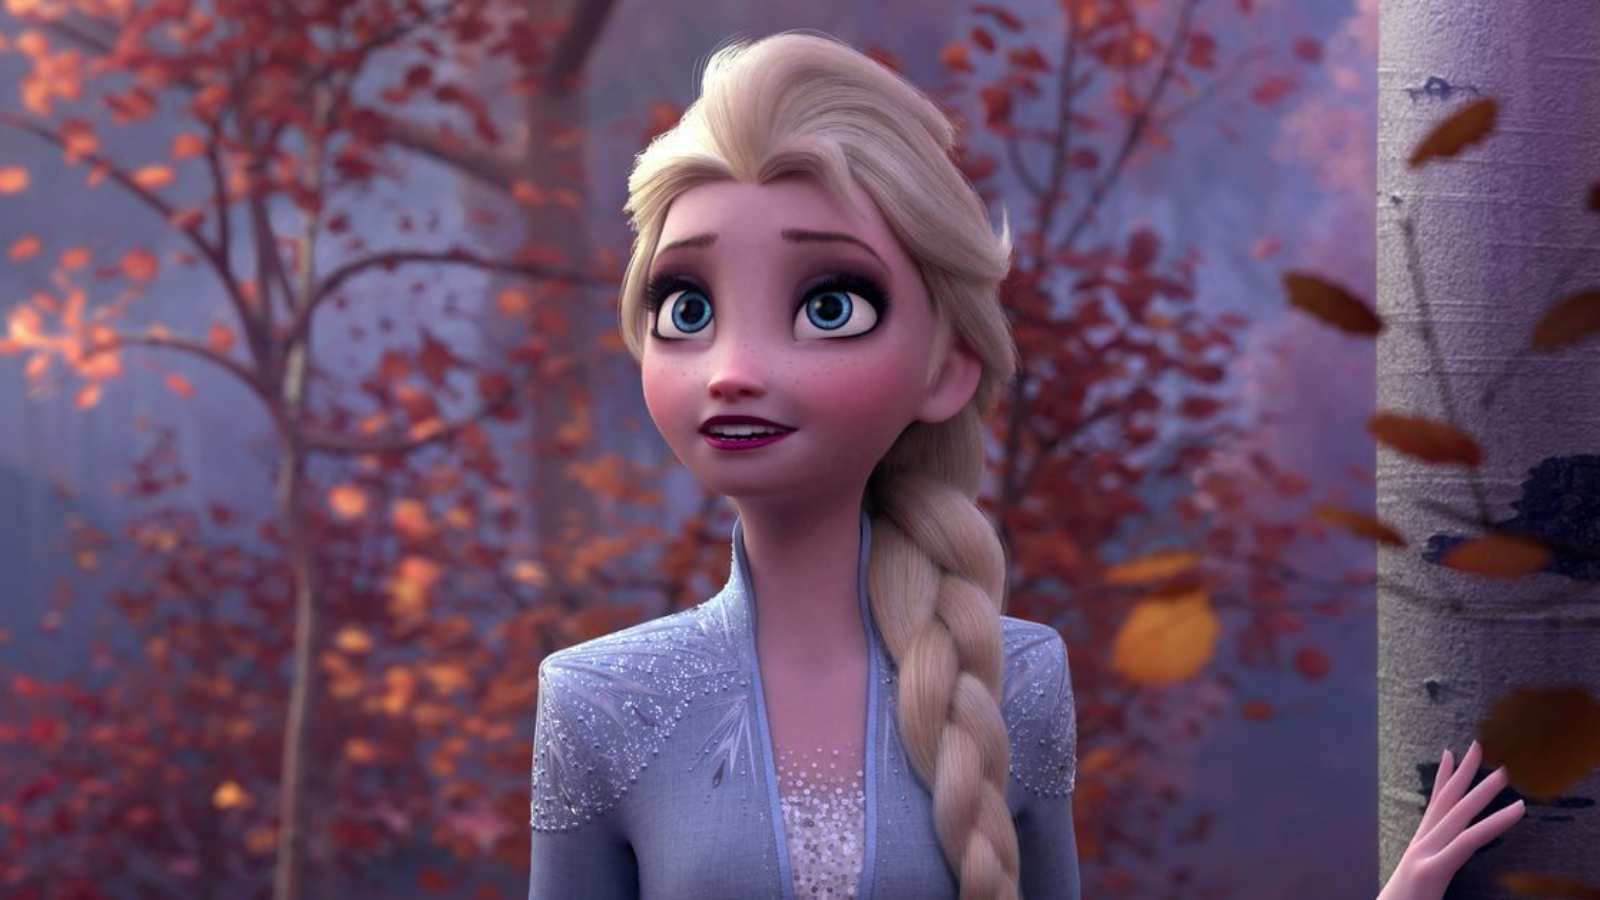 Disney Frozen's song also translated into Latin